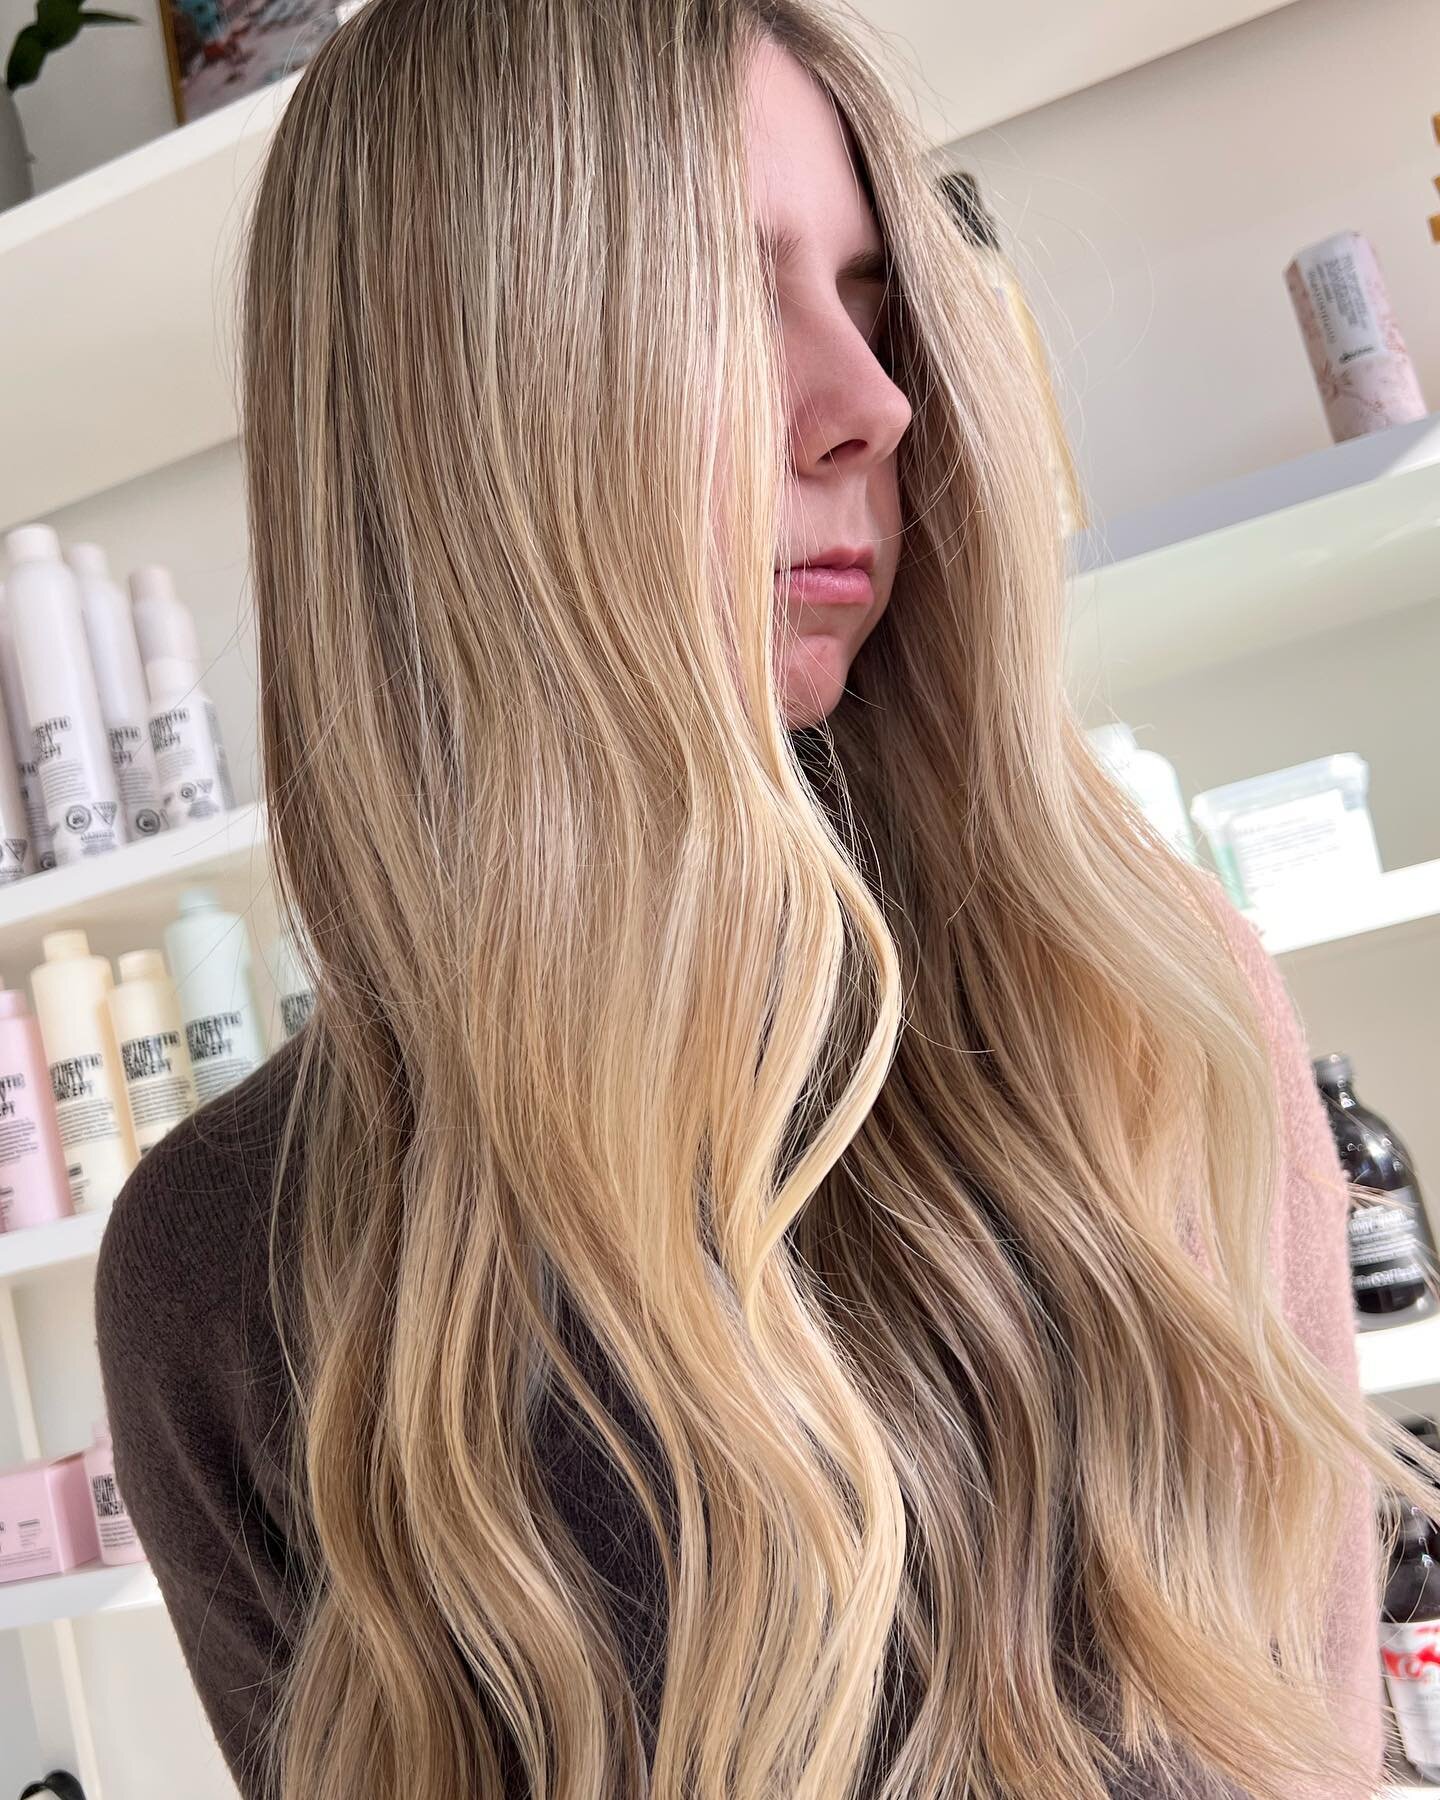 This Blonde&hellip; 😍😍😍 More daylight and the sun is out 🙏🏼

#yegsalon #yeghairstylist #haircolorist #hairsalon #salonlife #instahair #hairgoals #wella #k18 #authenticbeautymovement #behindthechair #hairofinstagram #studiolife #haircare #bhfyp